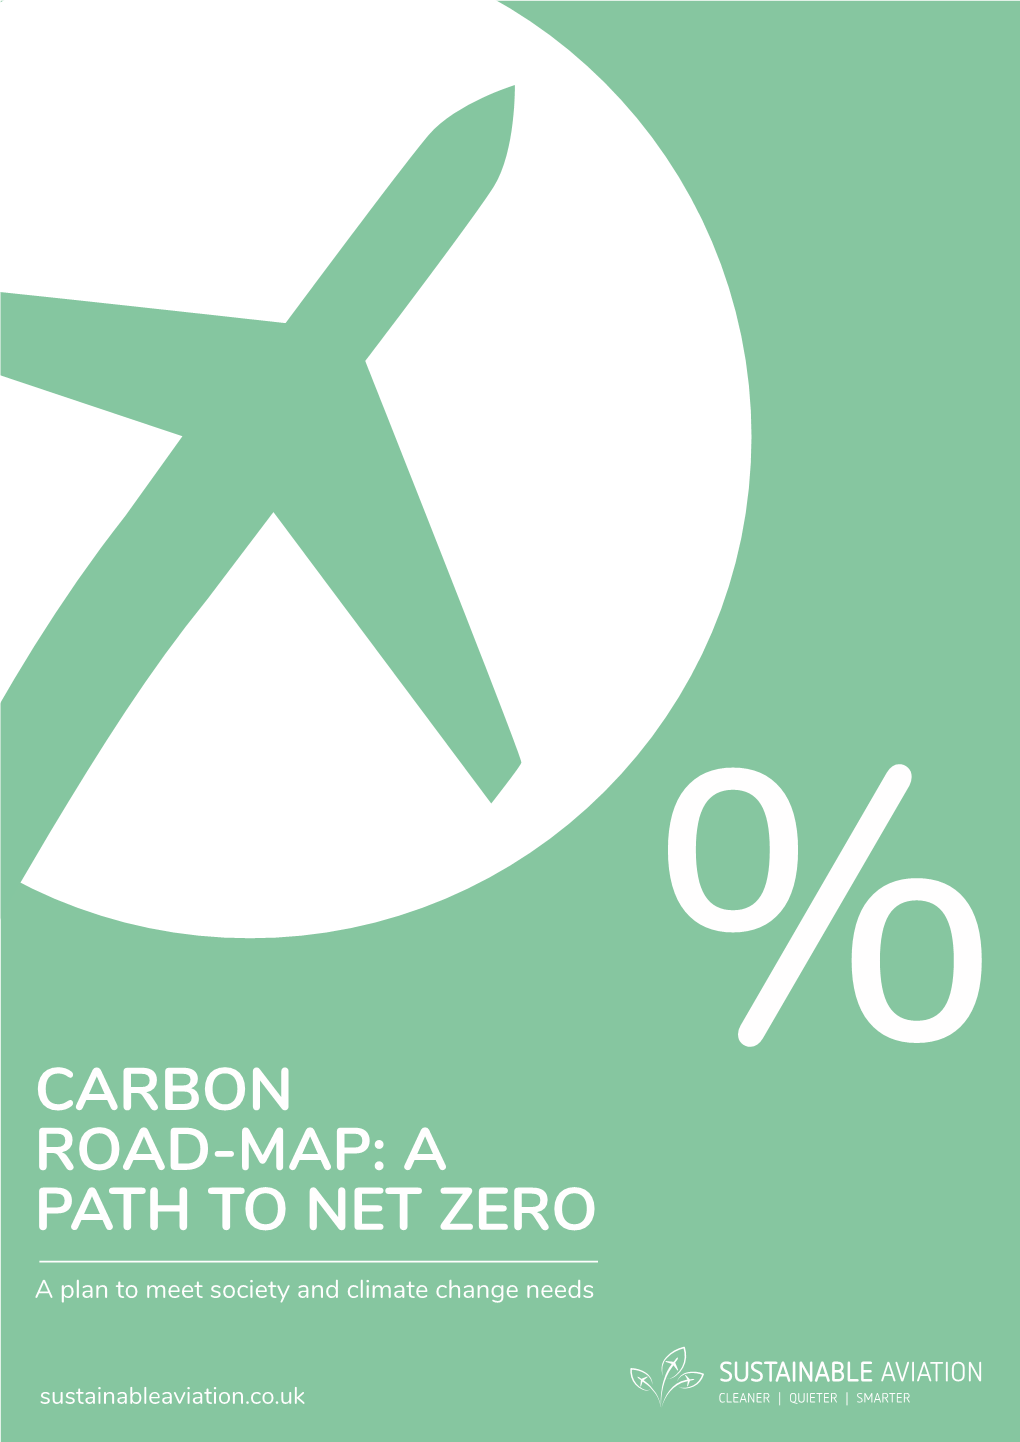 Carbon Road-Map: a Path to Net Zero